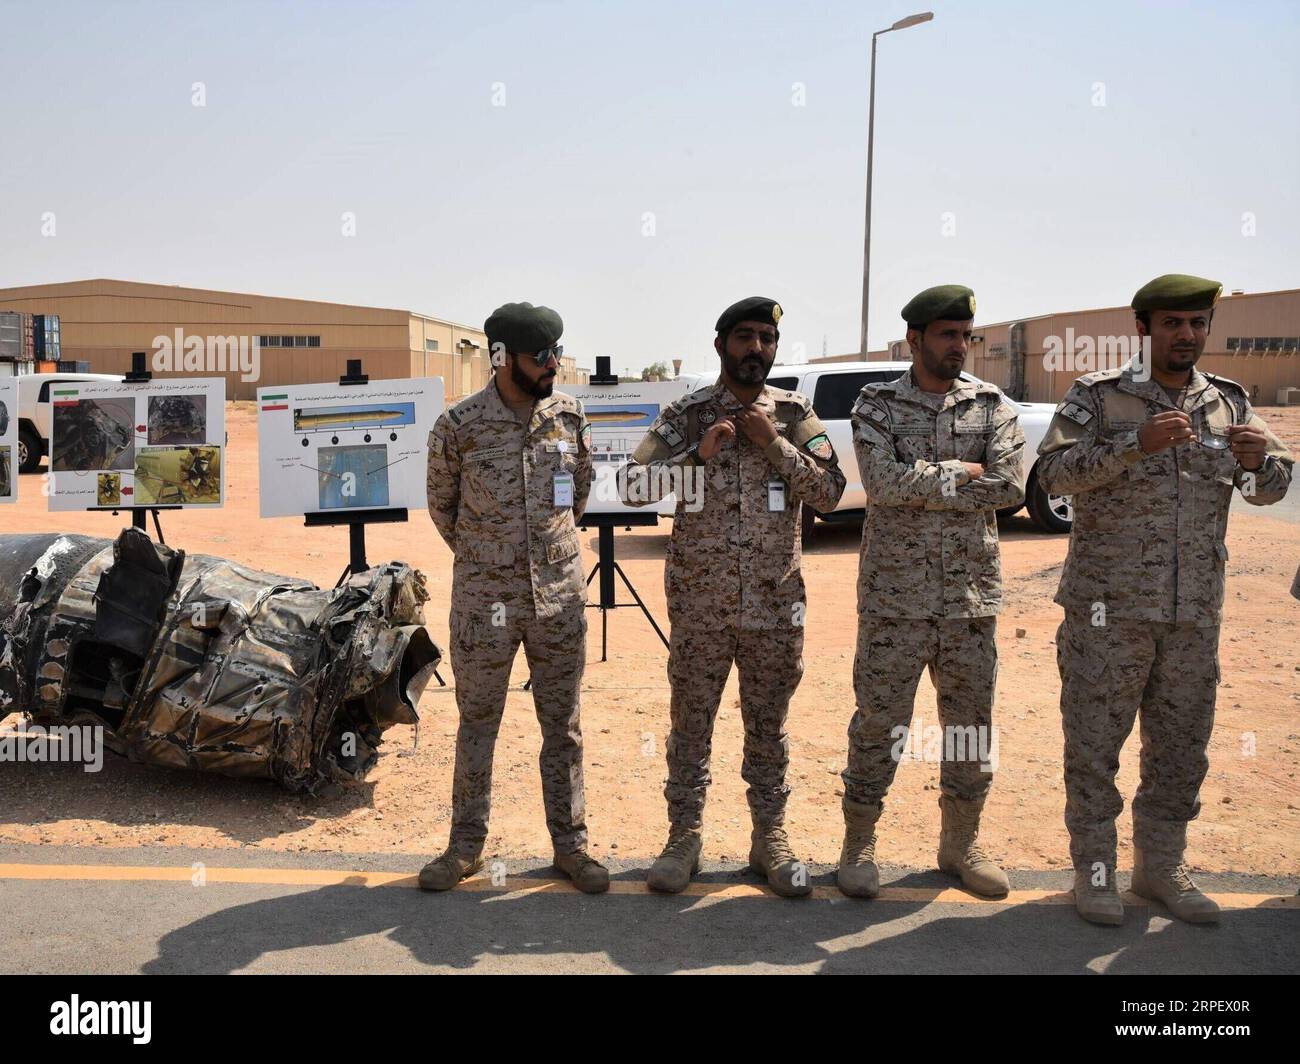 (190905) -- RIYADH, Sept. 5, 2019 -- Saudi army officers are seen at a military facility in Al Kharj, south of Riyadh, Saudi Arabia, on Sept. 5, 2019. Saudi-led coalition involved in a war in Yemen on Thursday intercepted a drone launched by Houthis towards Saudi border city Khamis Mushayt, Saudi Press Agency reported. ) SAUDI ARABIA-RIYADH-HOUTHI DRONE TuxYifan PUBLICATIONxNOTxINxCHN Stock Photo